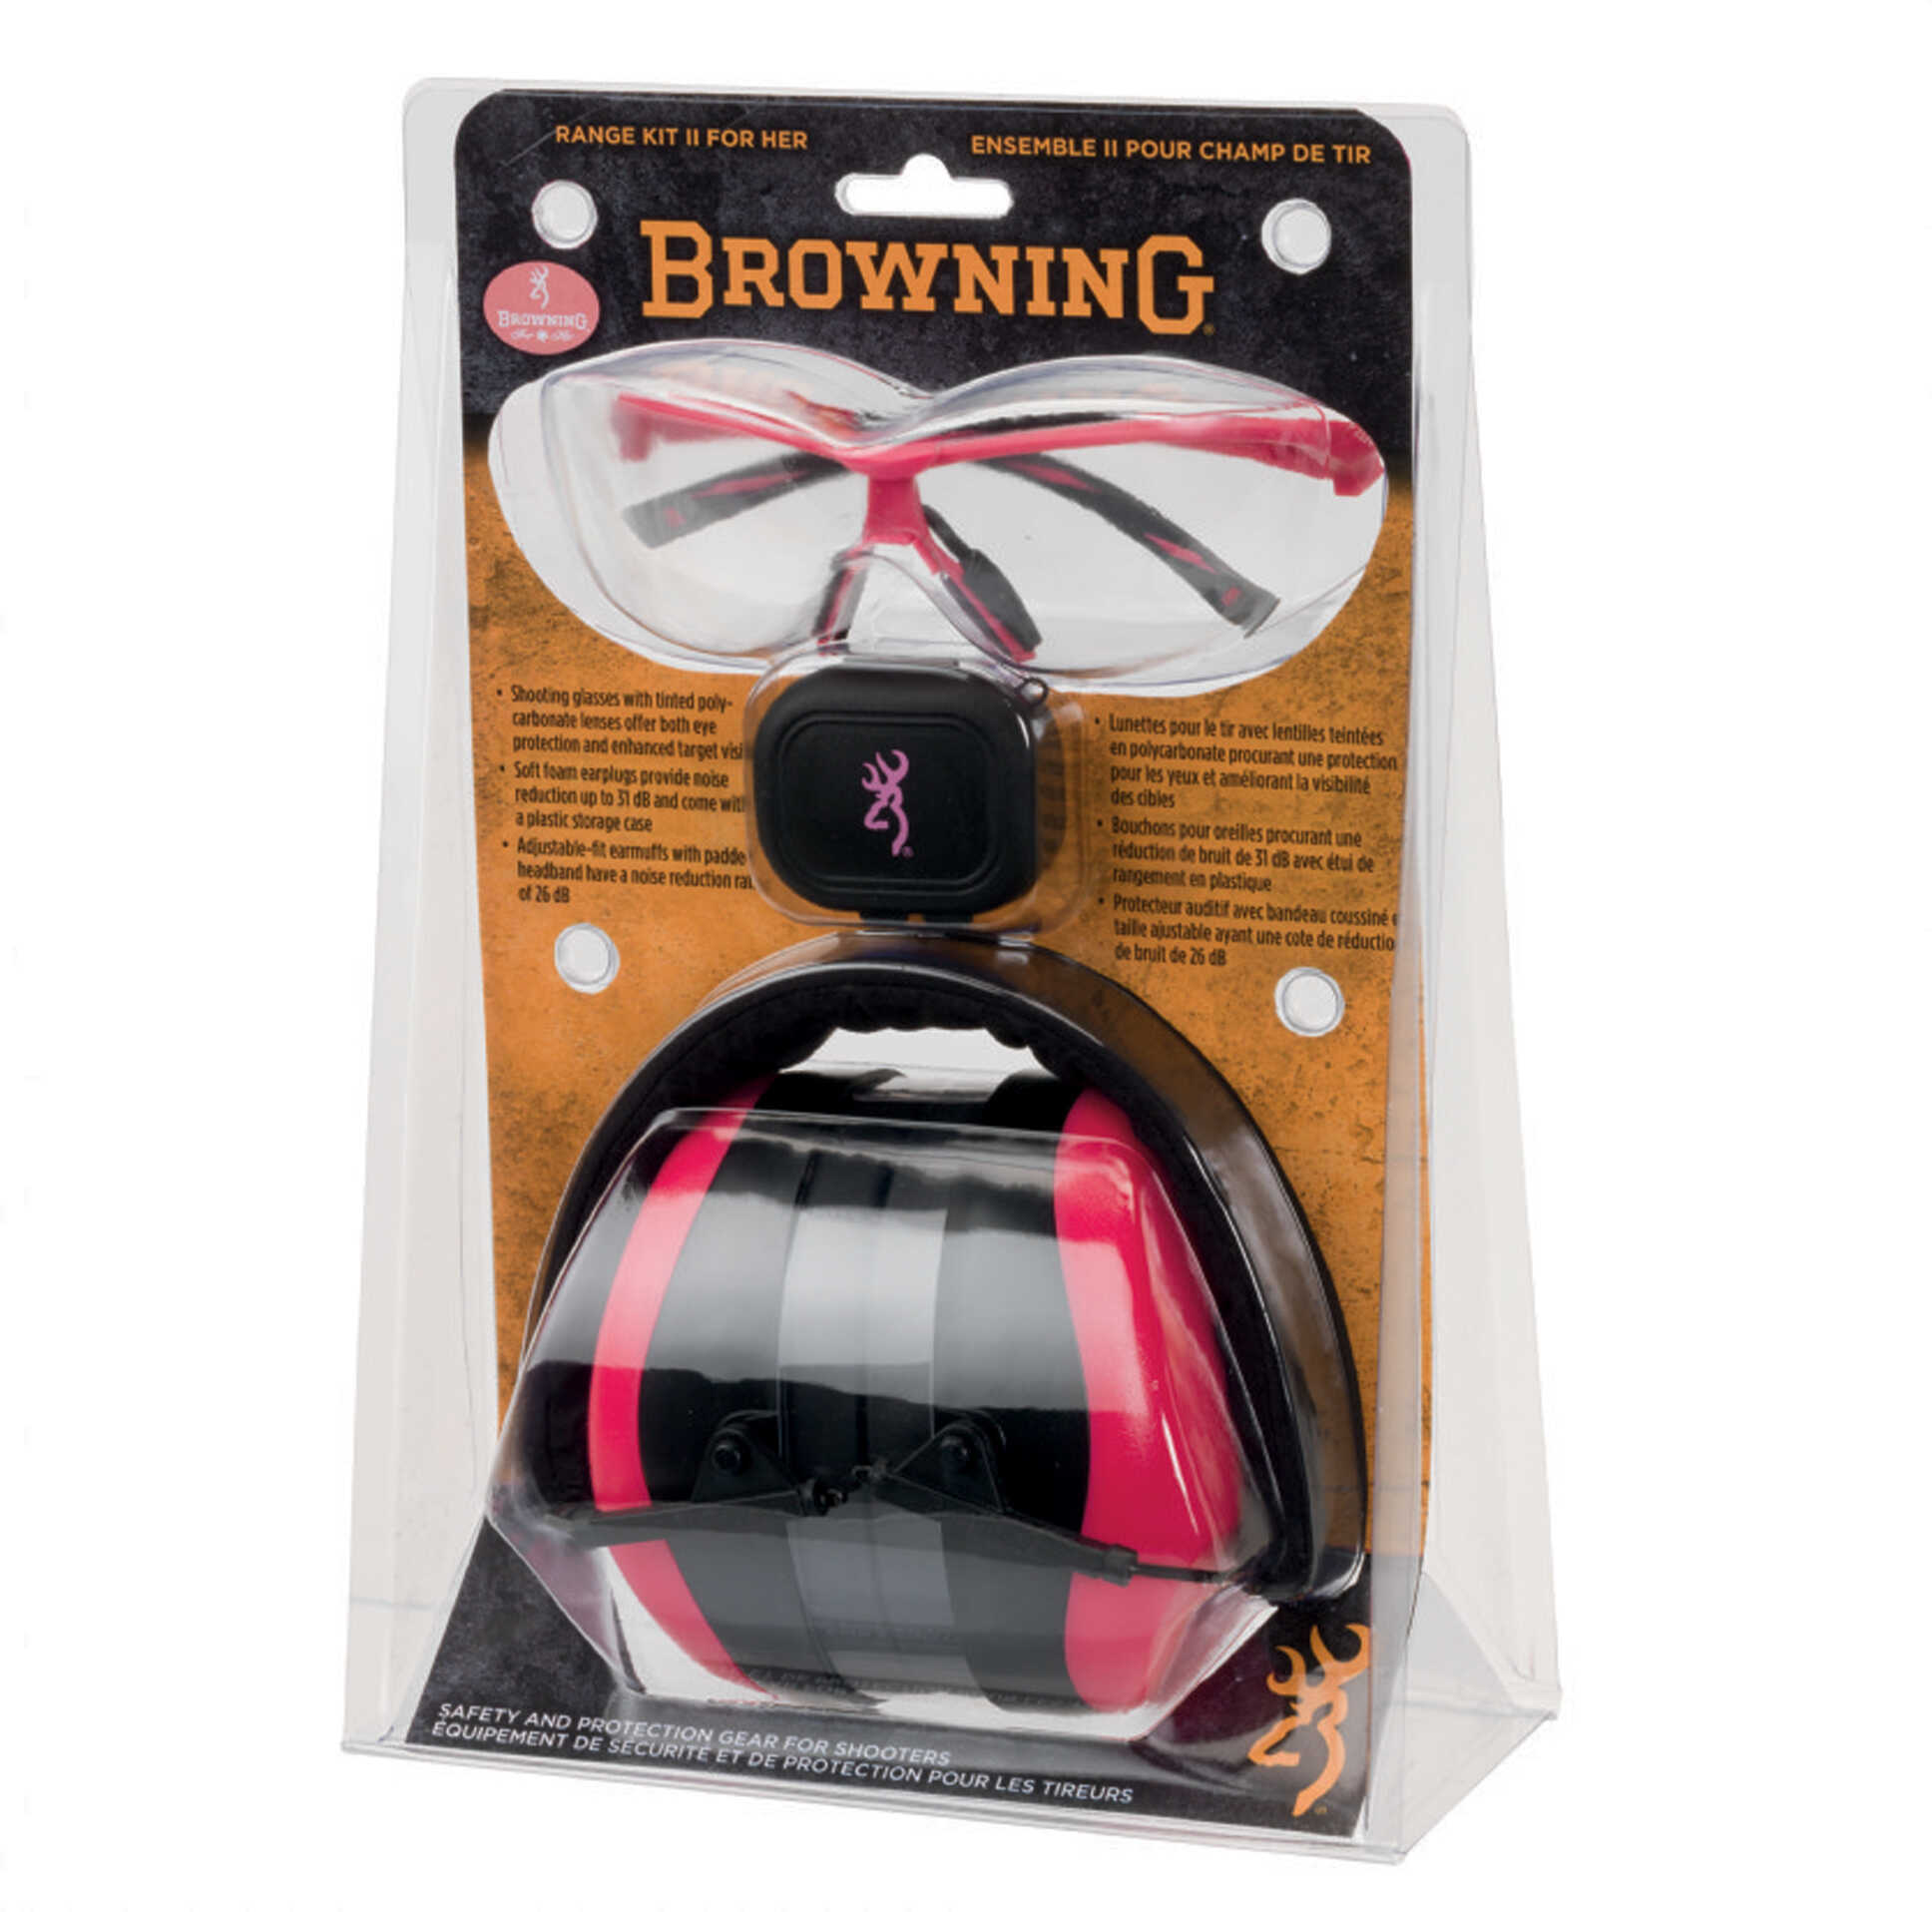 Browning Hearing Protection Range Kit II For Her, Black & Hot Pink